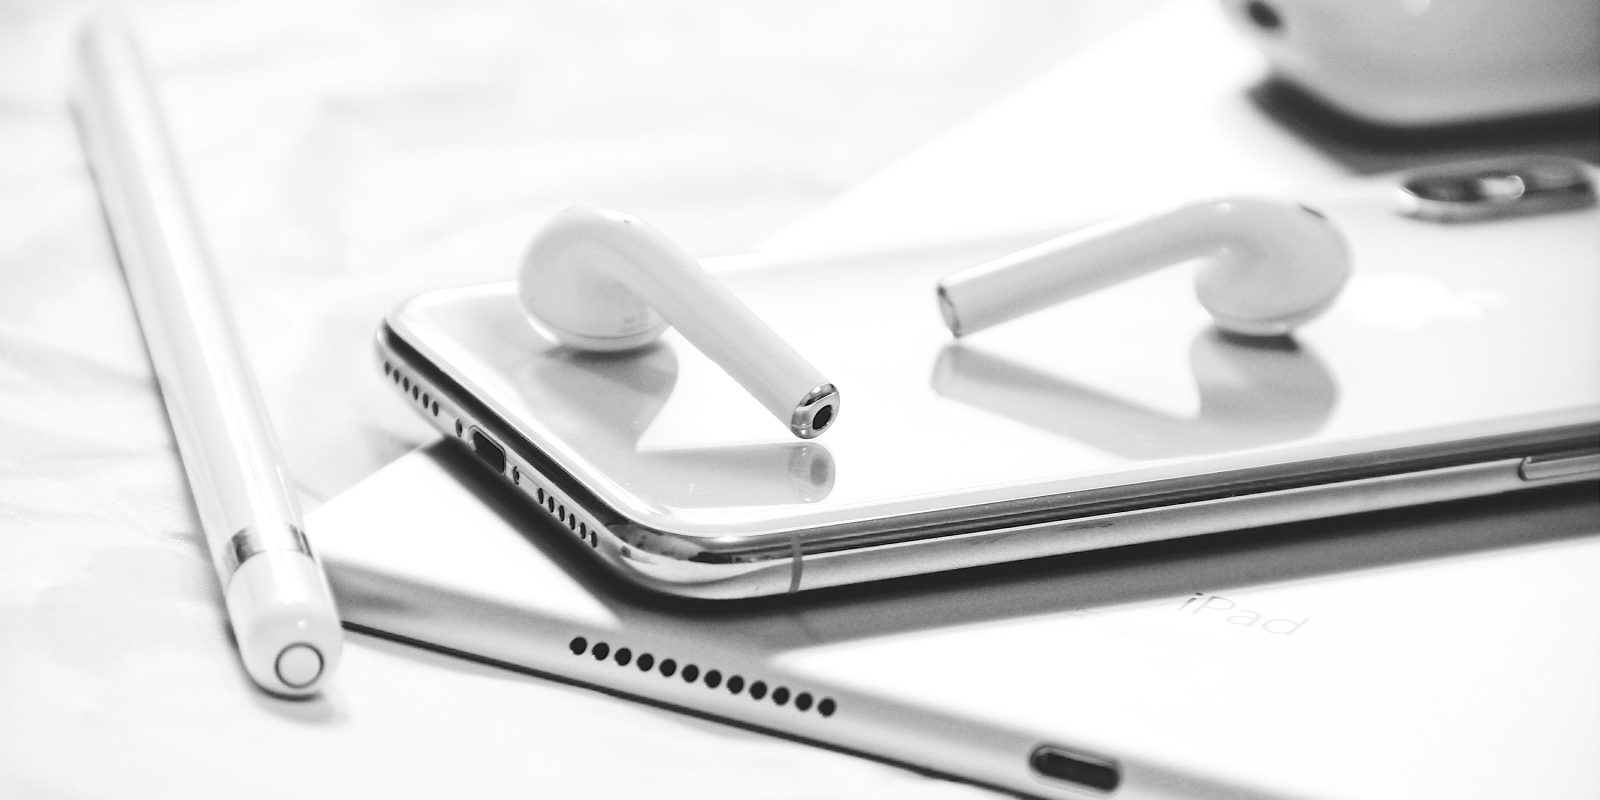 AirPods demand reportedly falling